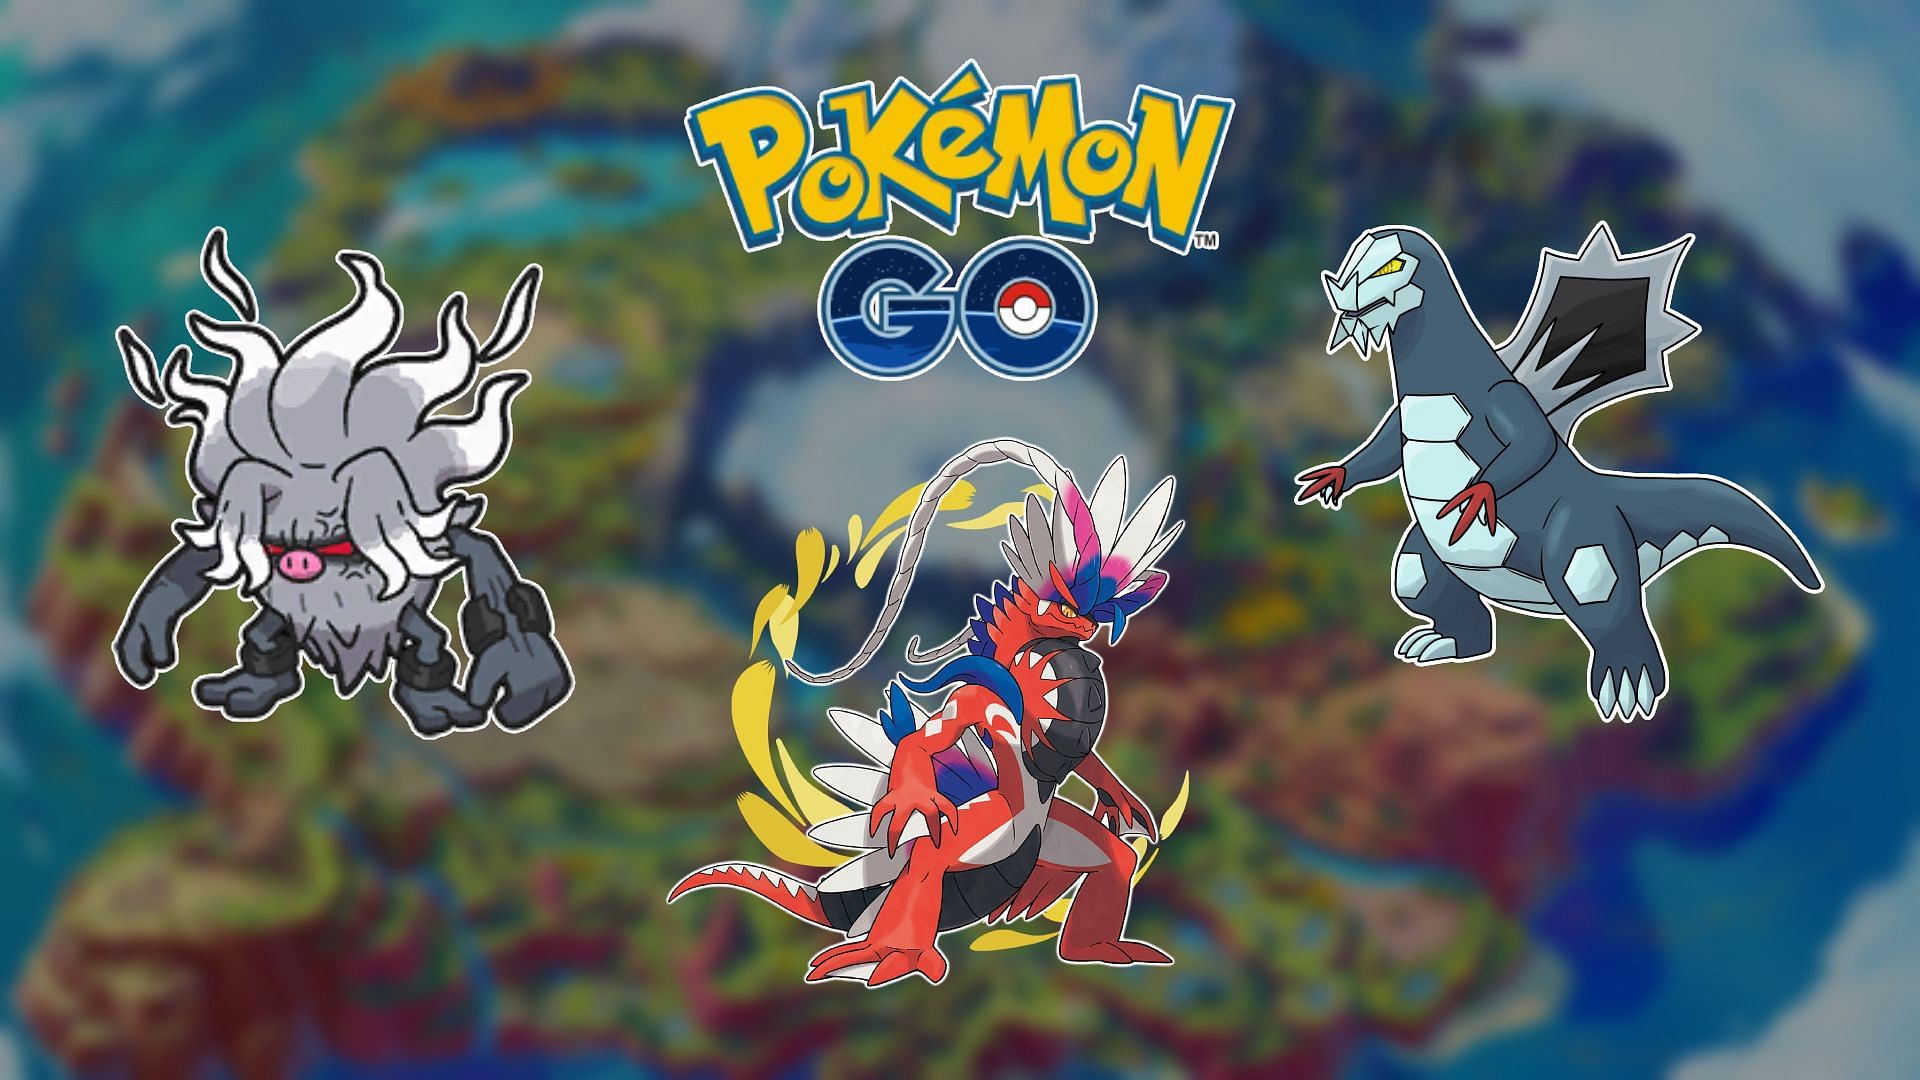 Pokemo GO players are really excited to see the Generation IX monsters in-game. (Image via Spotskeeda) 